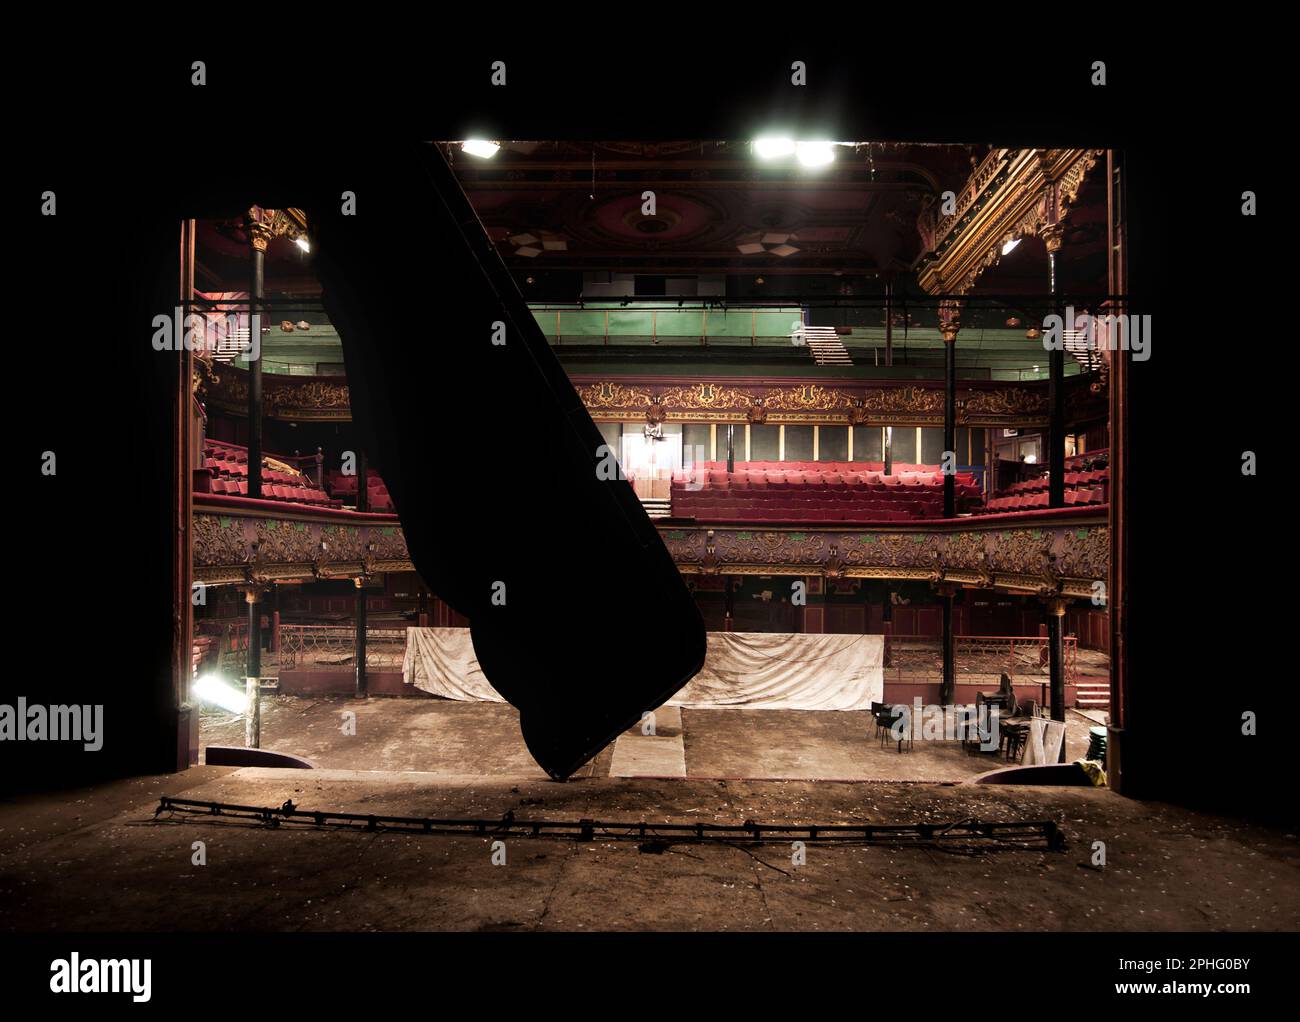 From the stage of the long abandoned Hulme Hippodrome Theatre in Manchester, an old building sadly in disrepair. Stock Photo